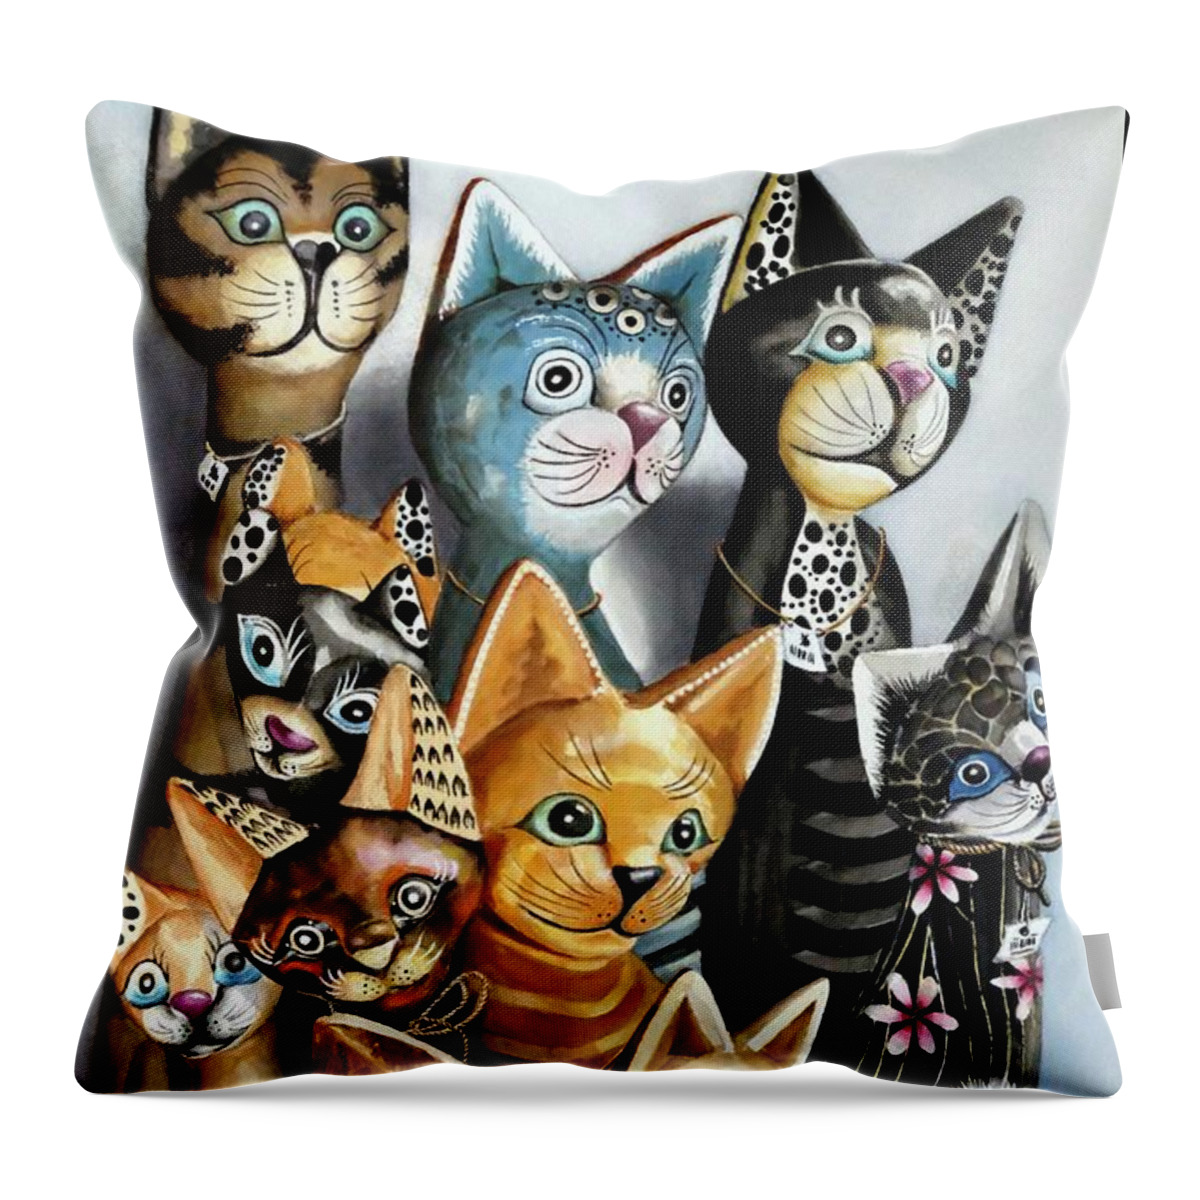 Cat Throw Pillow featuring the painting Cheaper by the Dozen by Jeanette Ferguson